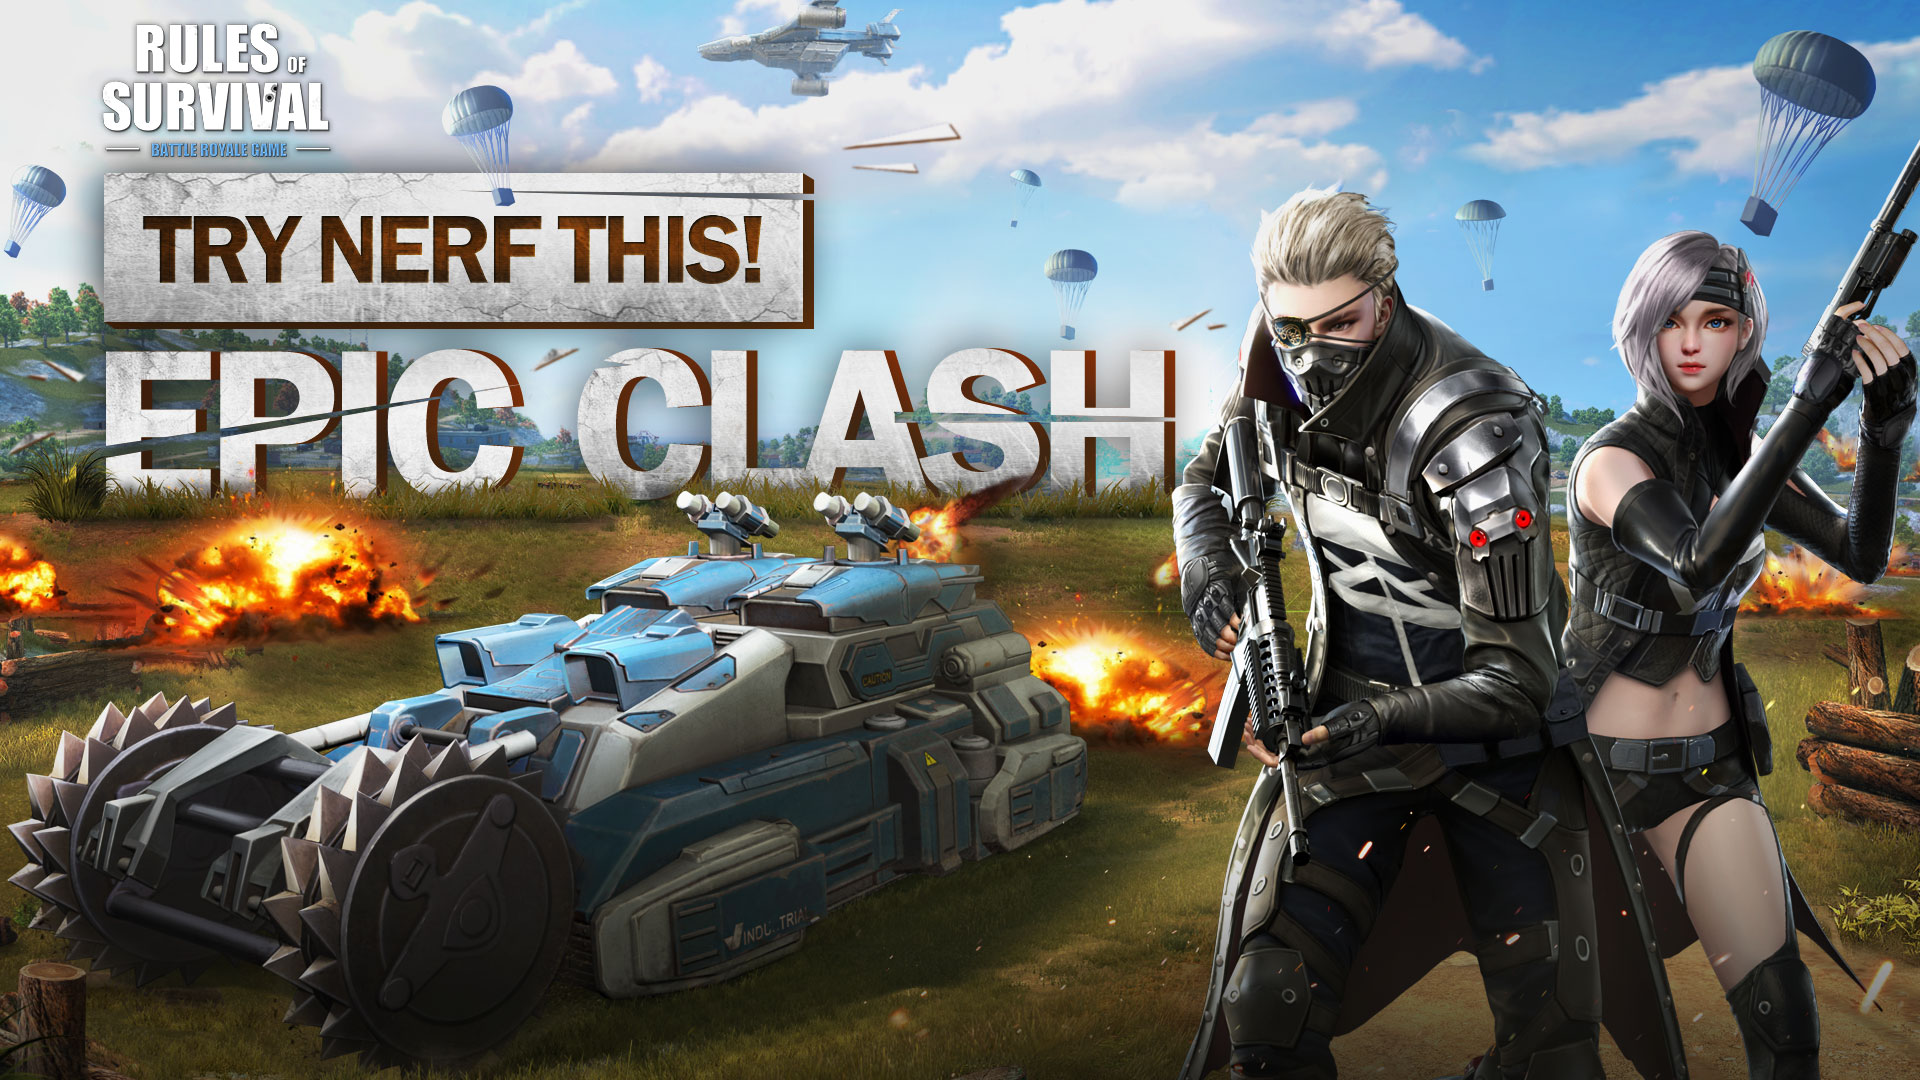 Rules of Survival Epic Clash is Online with the Most Insane Super